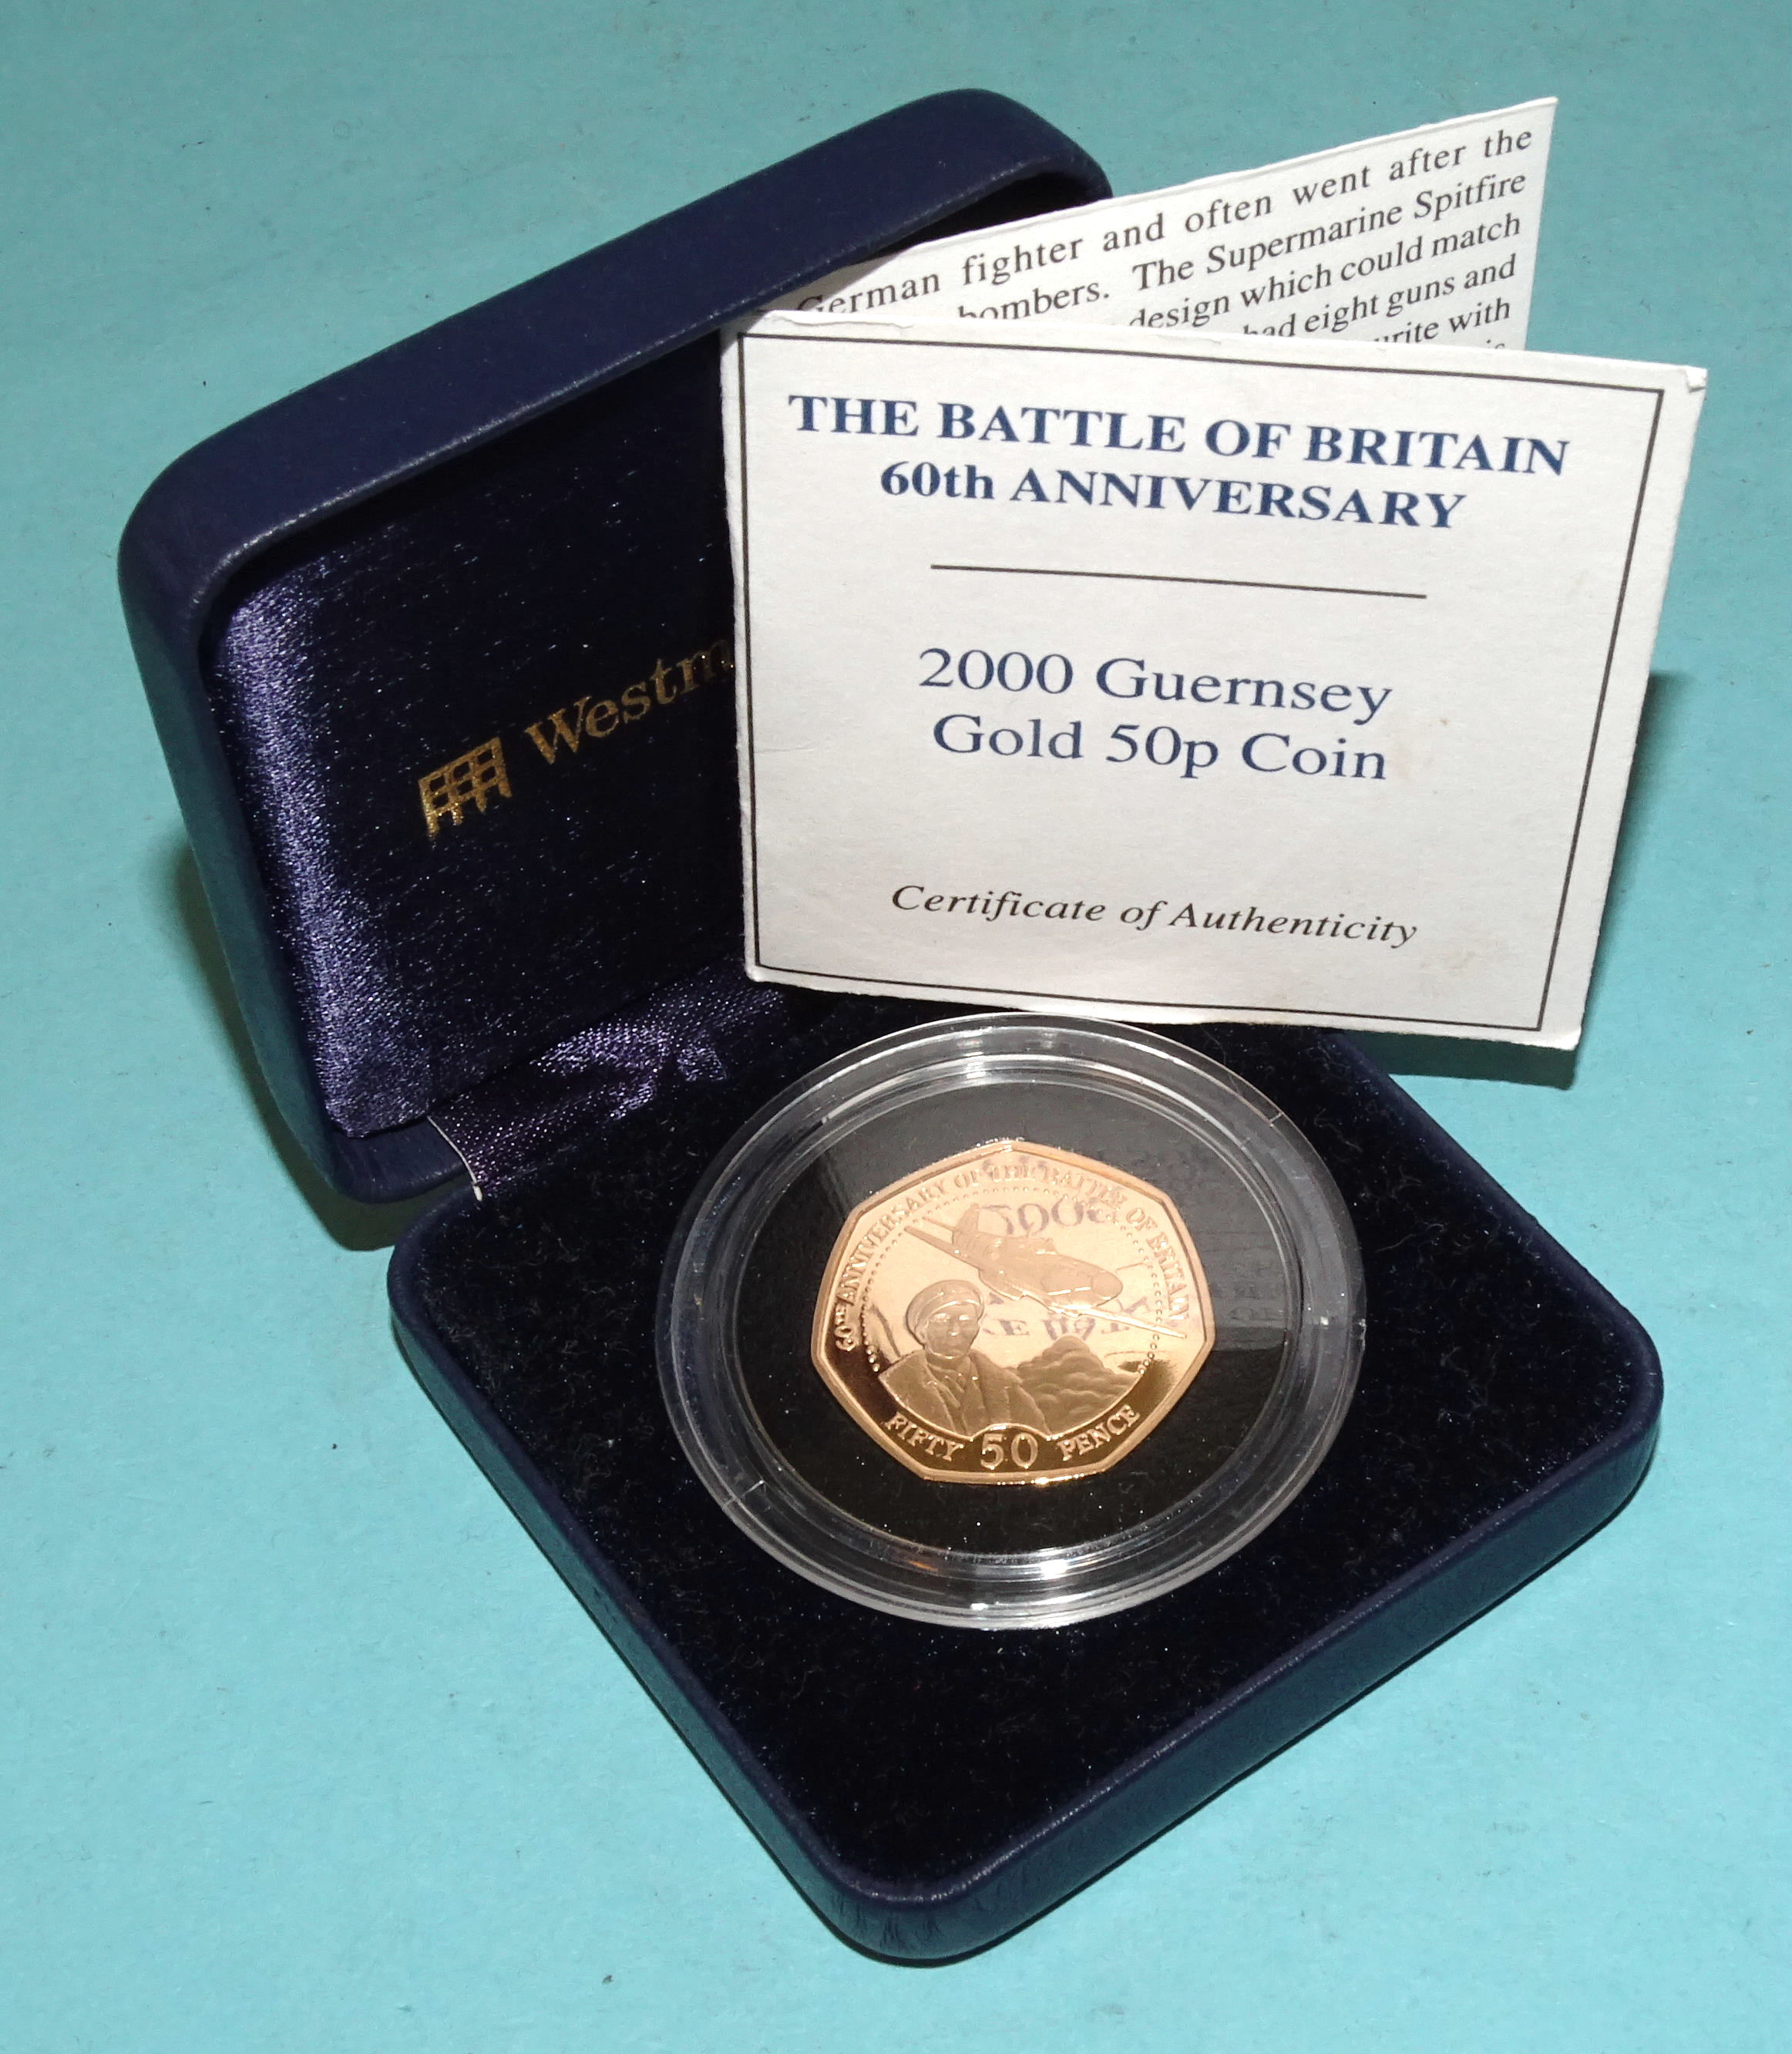 A Royal Mint 2000 Guernsey gold 50p coin 'The Battle of Britain 60th Anniversary', 15.5g, (cased,